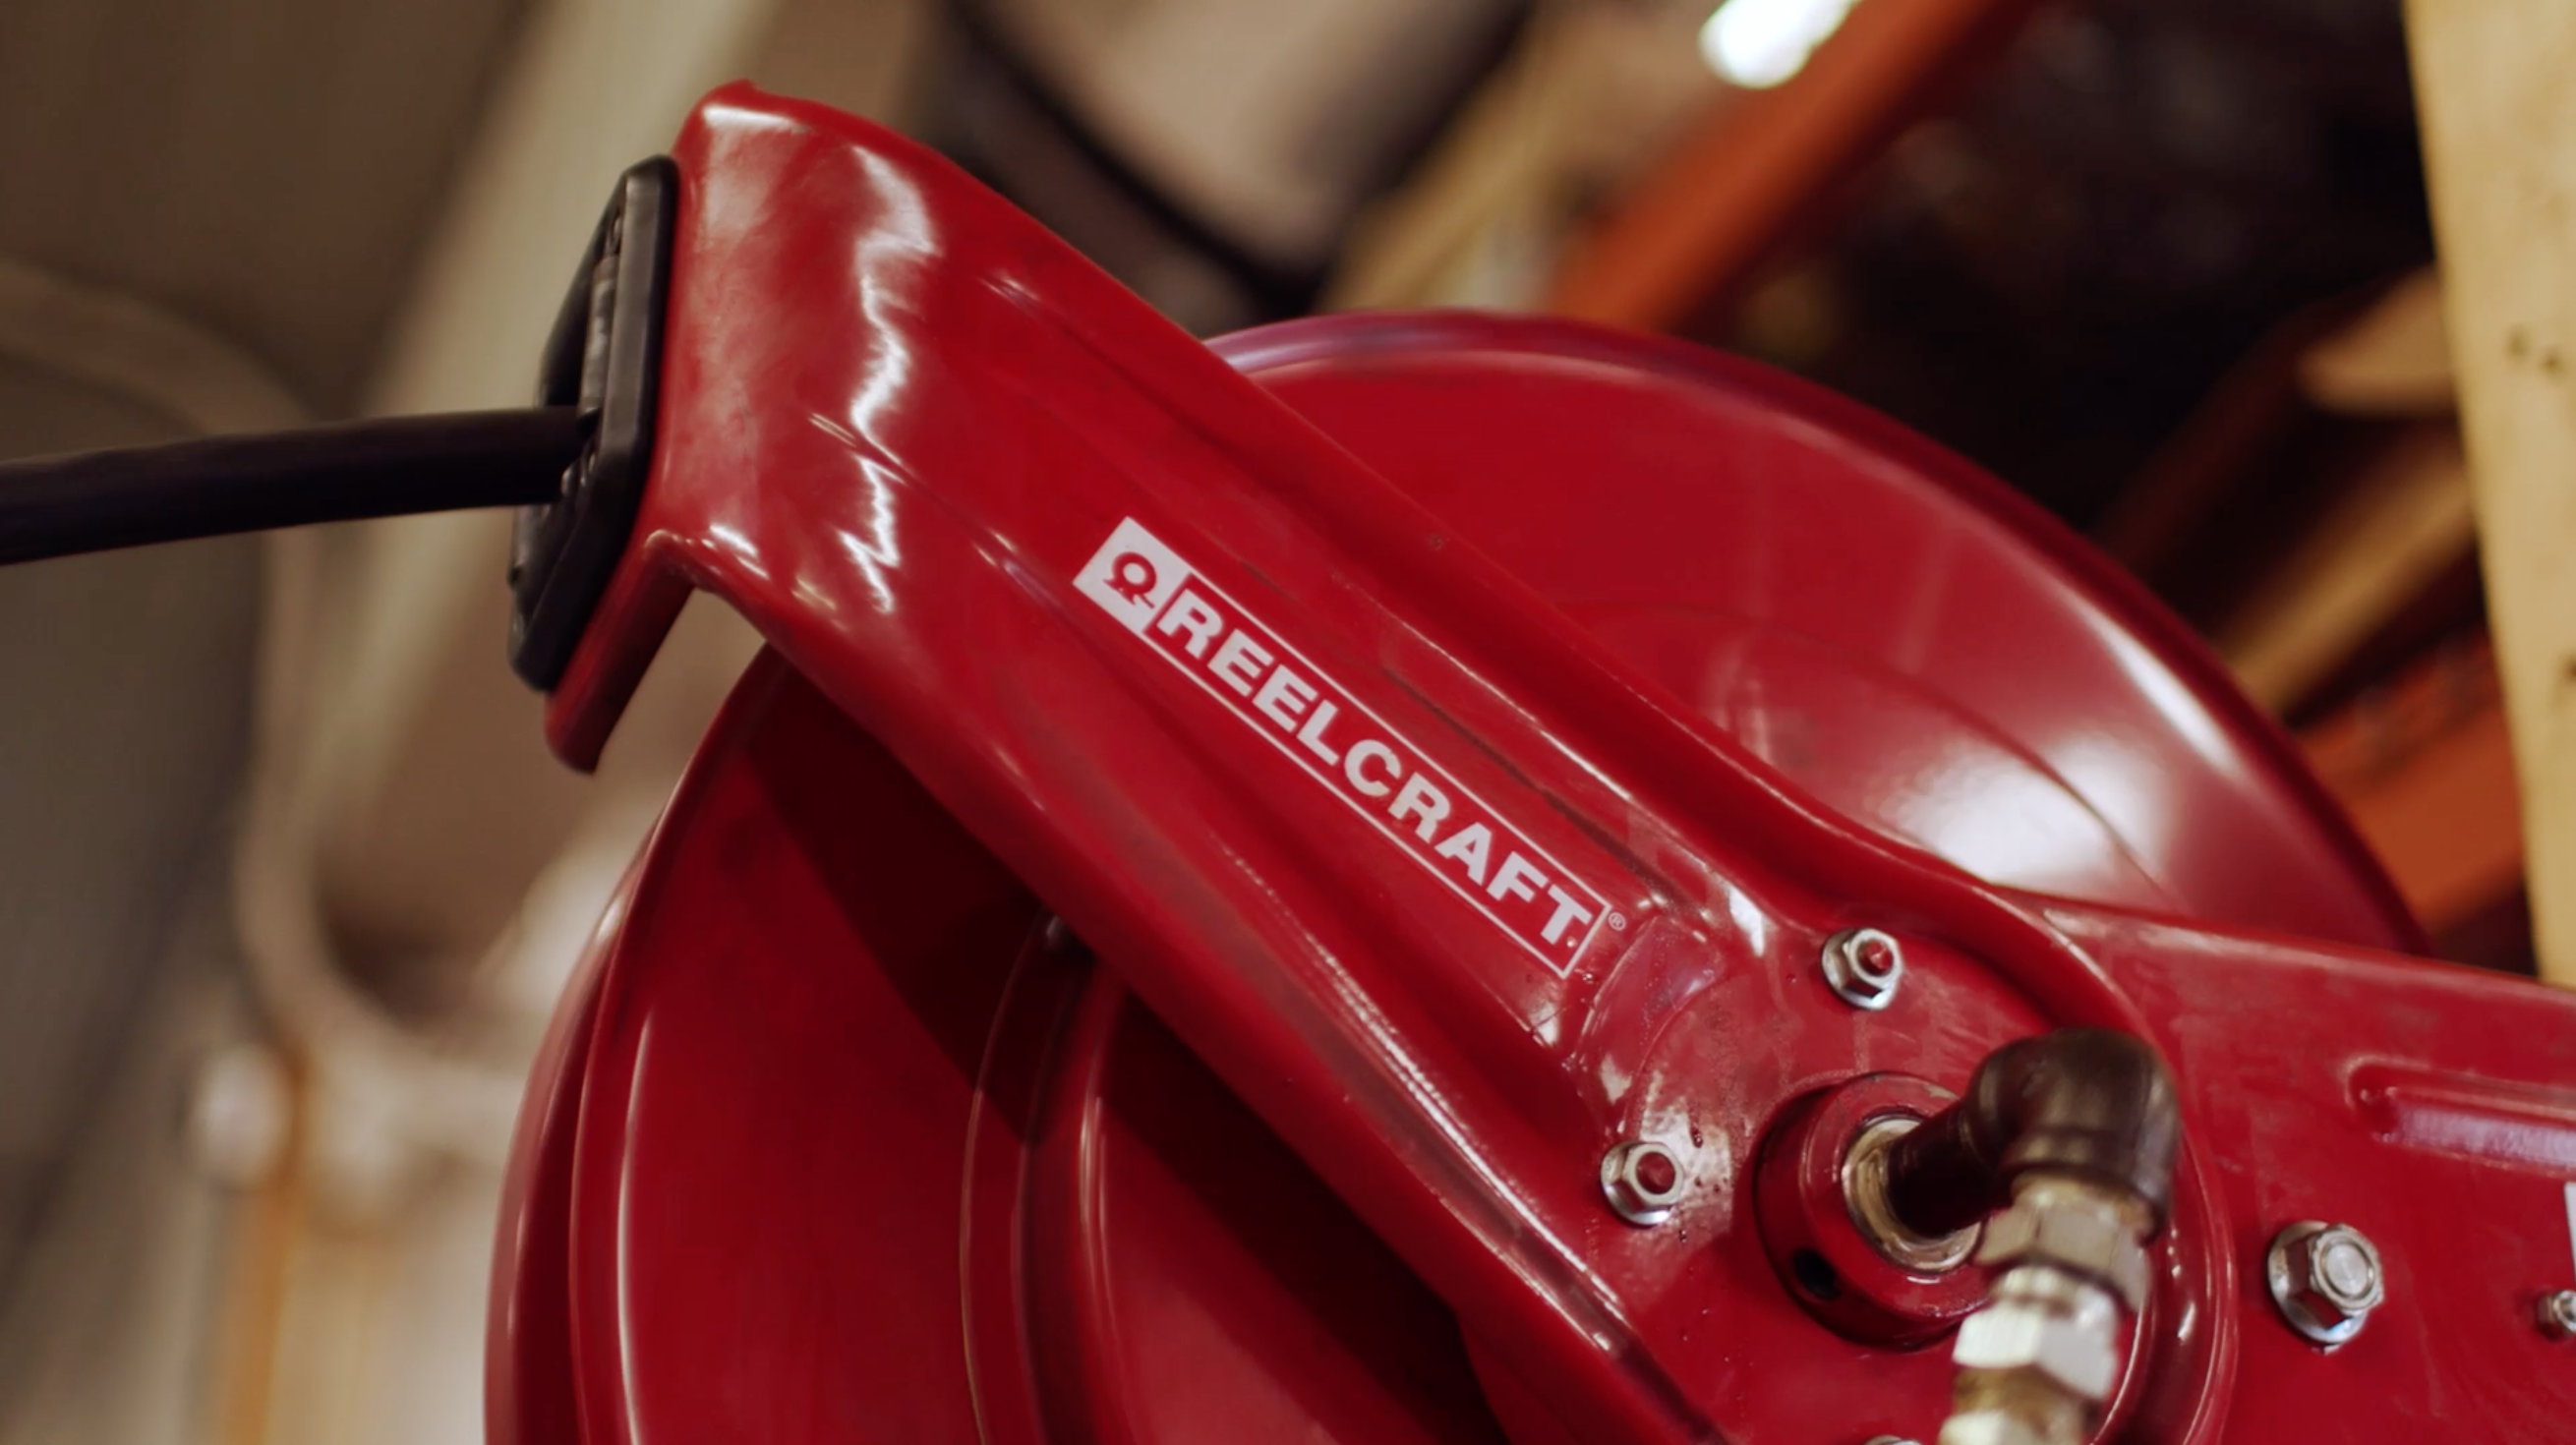 Ready When You Are® - Reelcraft Hose, Cord, and Cable Reels